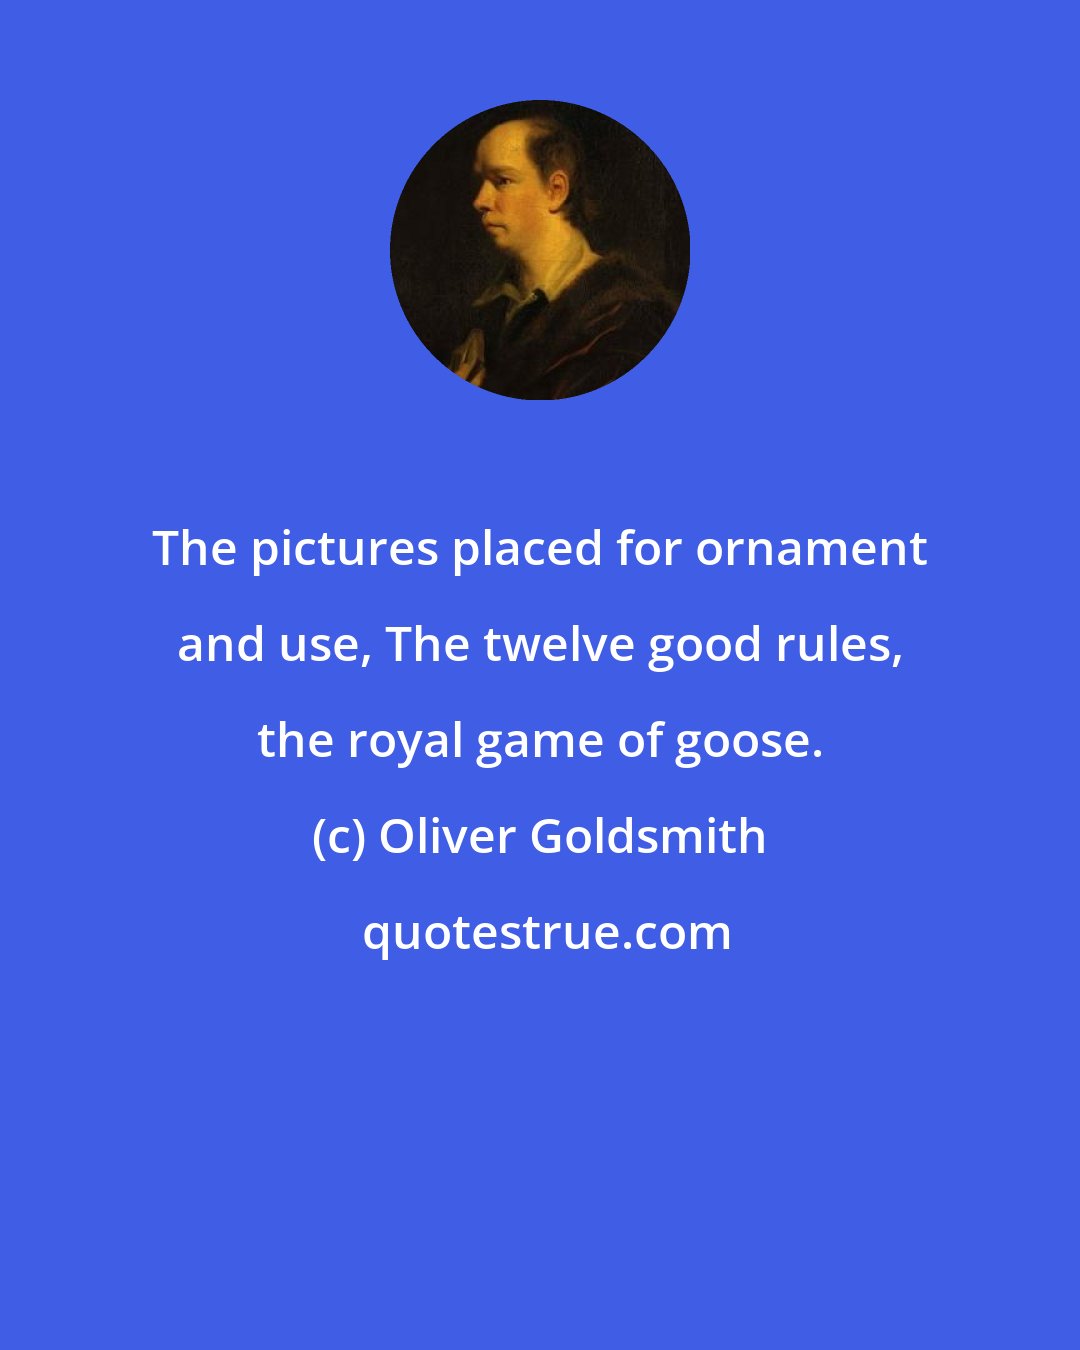 Oliver Goldsmith: The pictures placed for ornament and use, The twelve good rules, the royal game of goose.